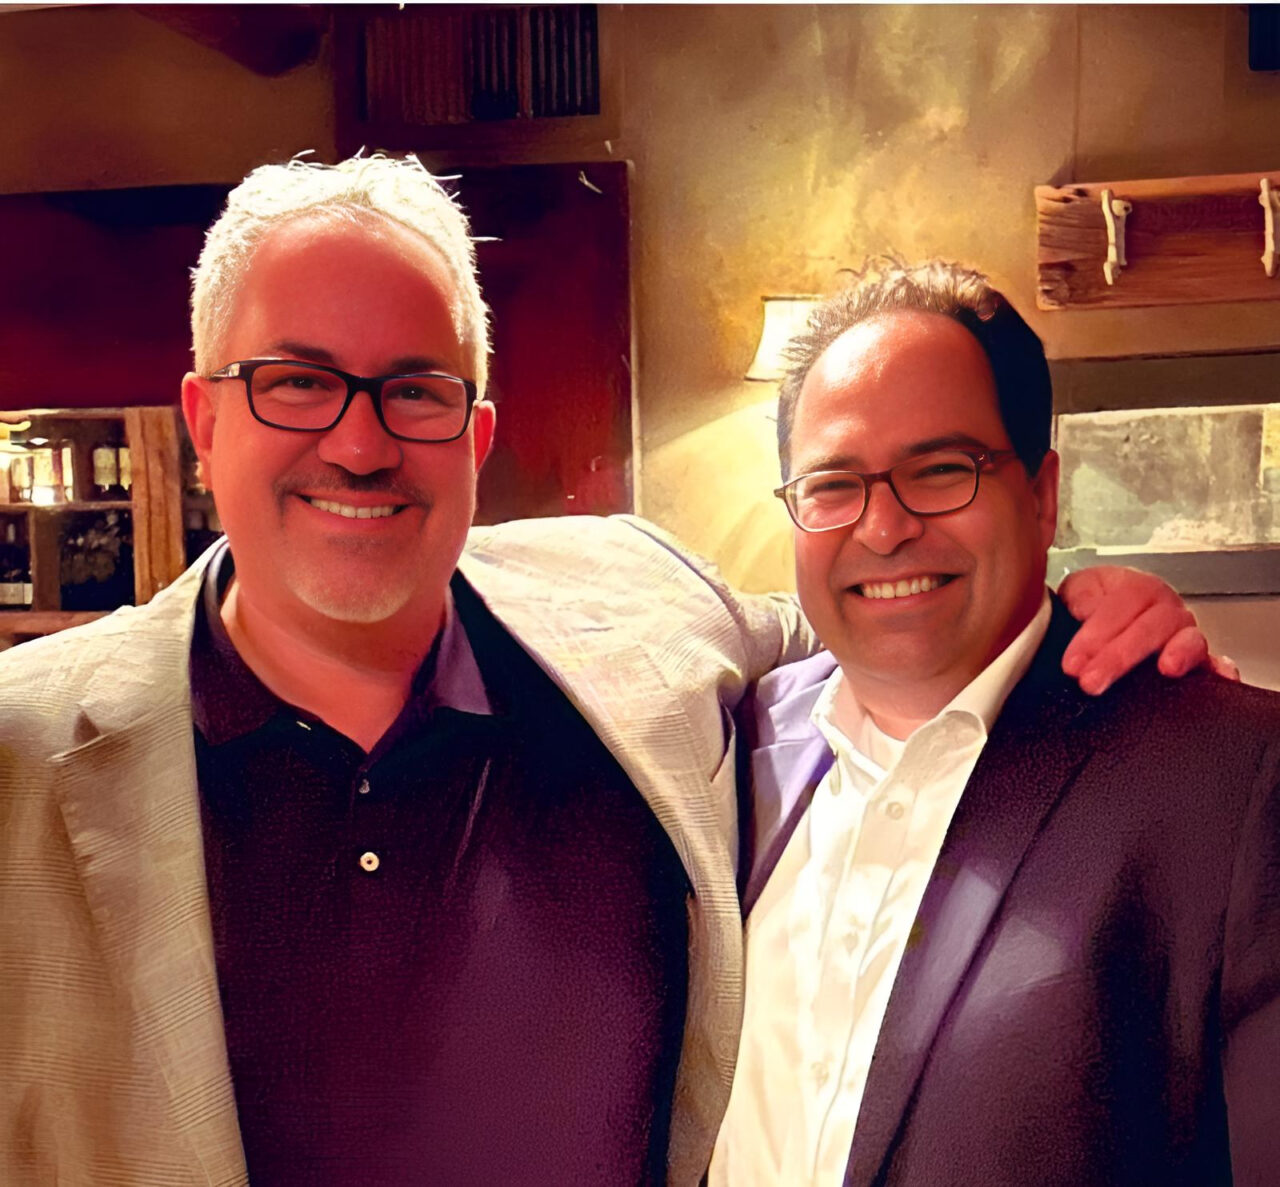 Naveen Pemmaraju: Always wonderful to catch up and discuss the future of the Myeloproliferative Neoplasms research field!